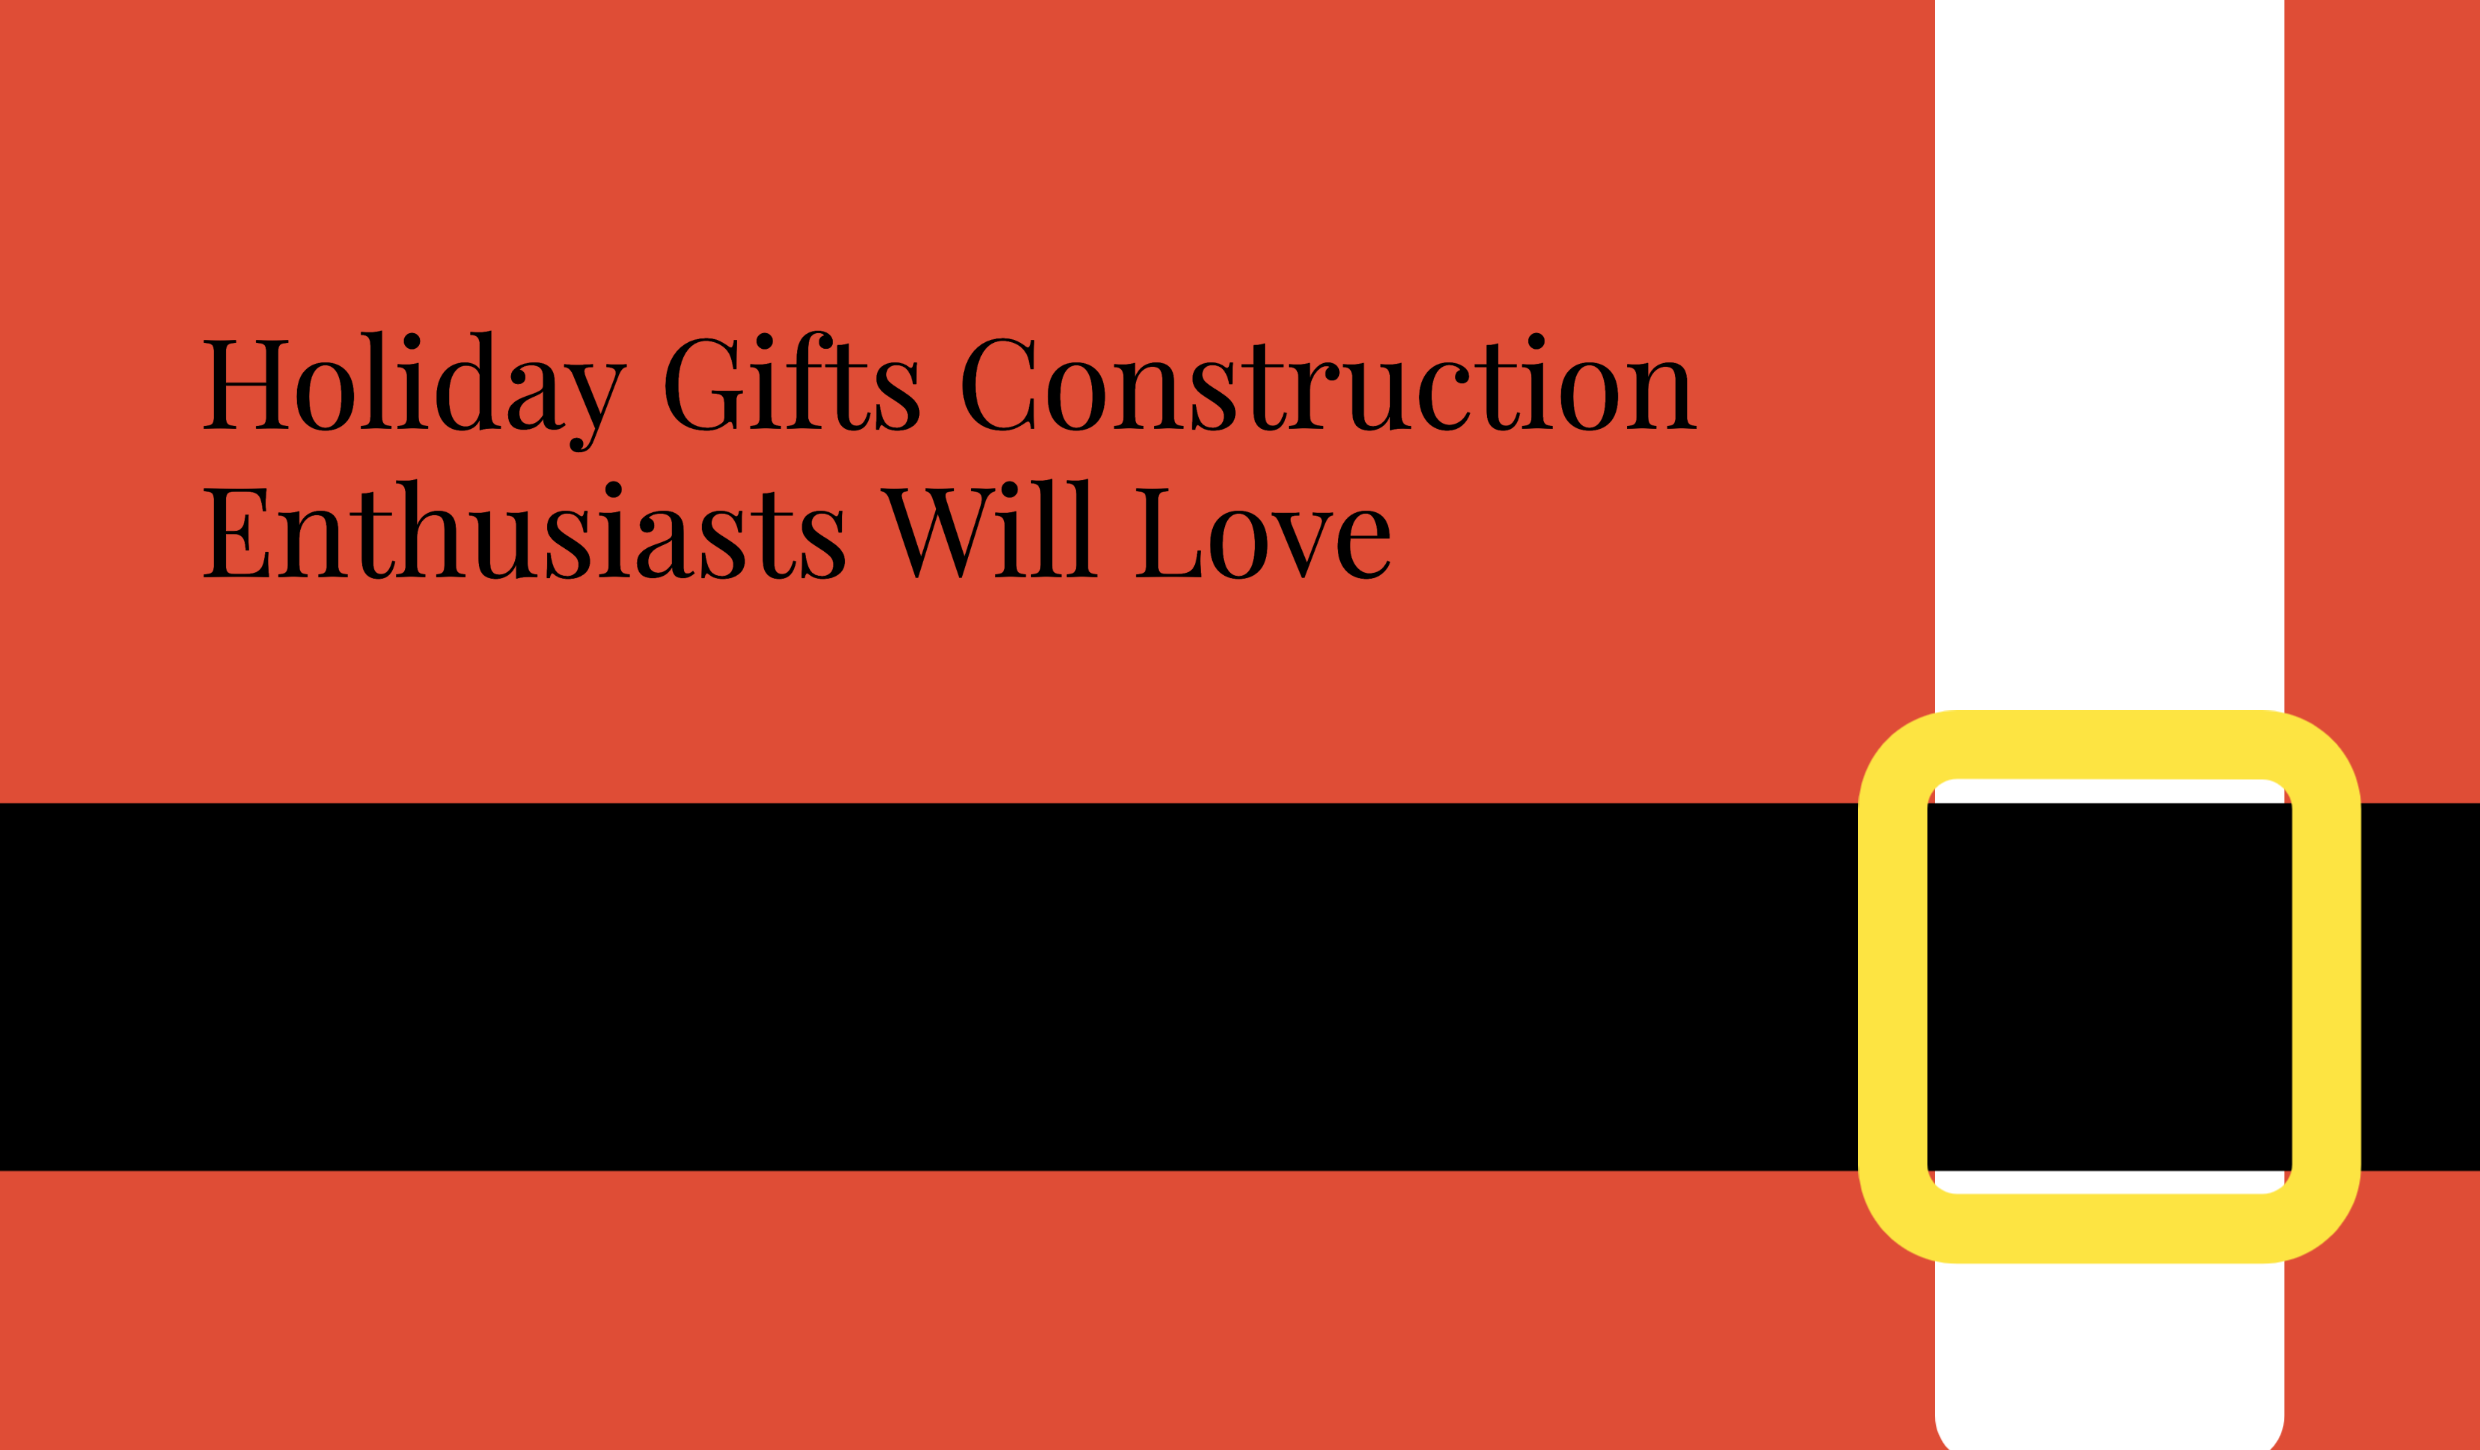 Holiday Gifts Construction Enthusiasts Will Love